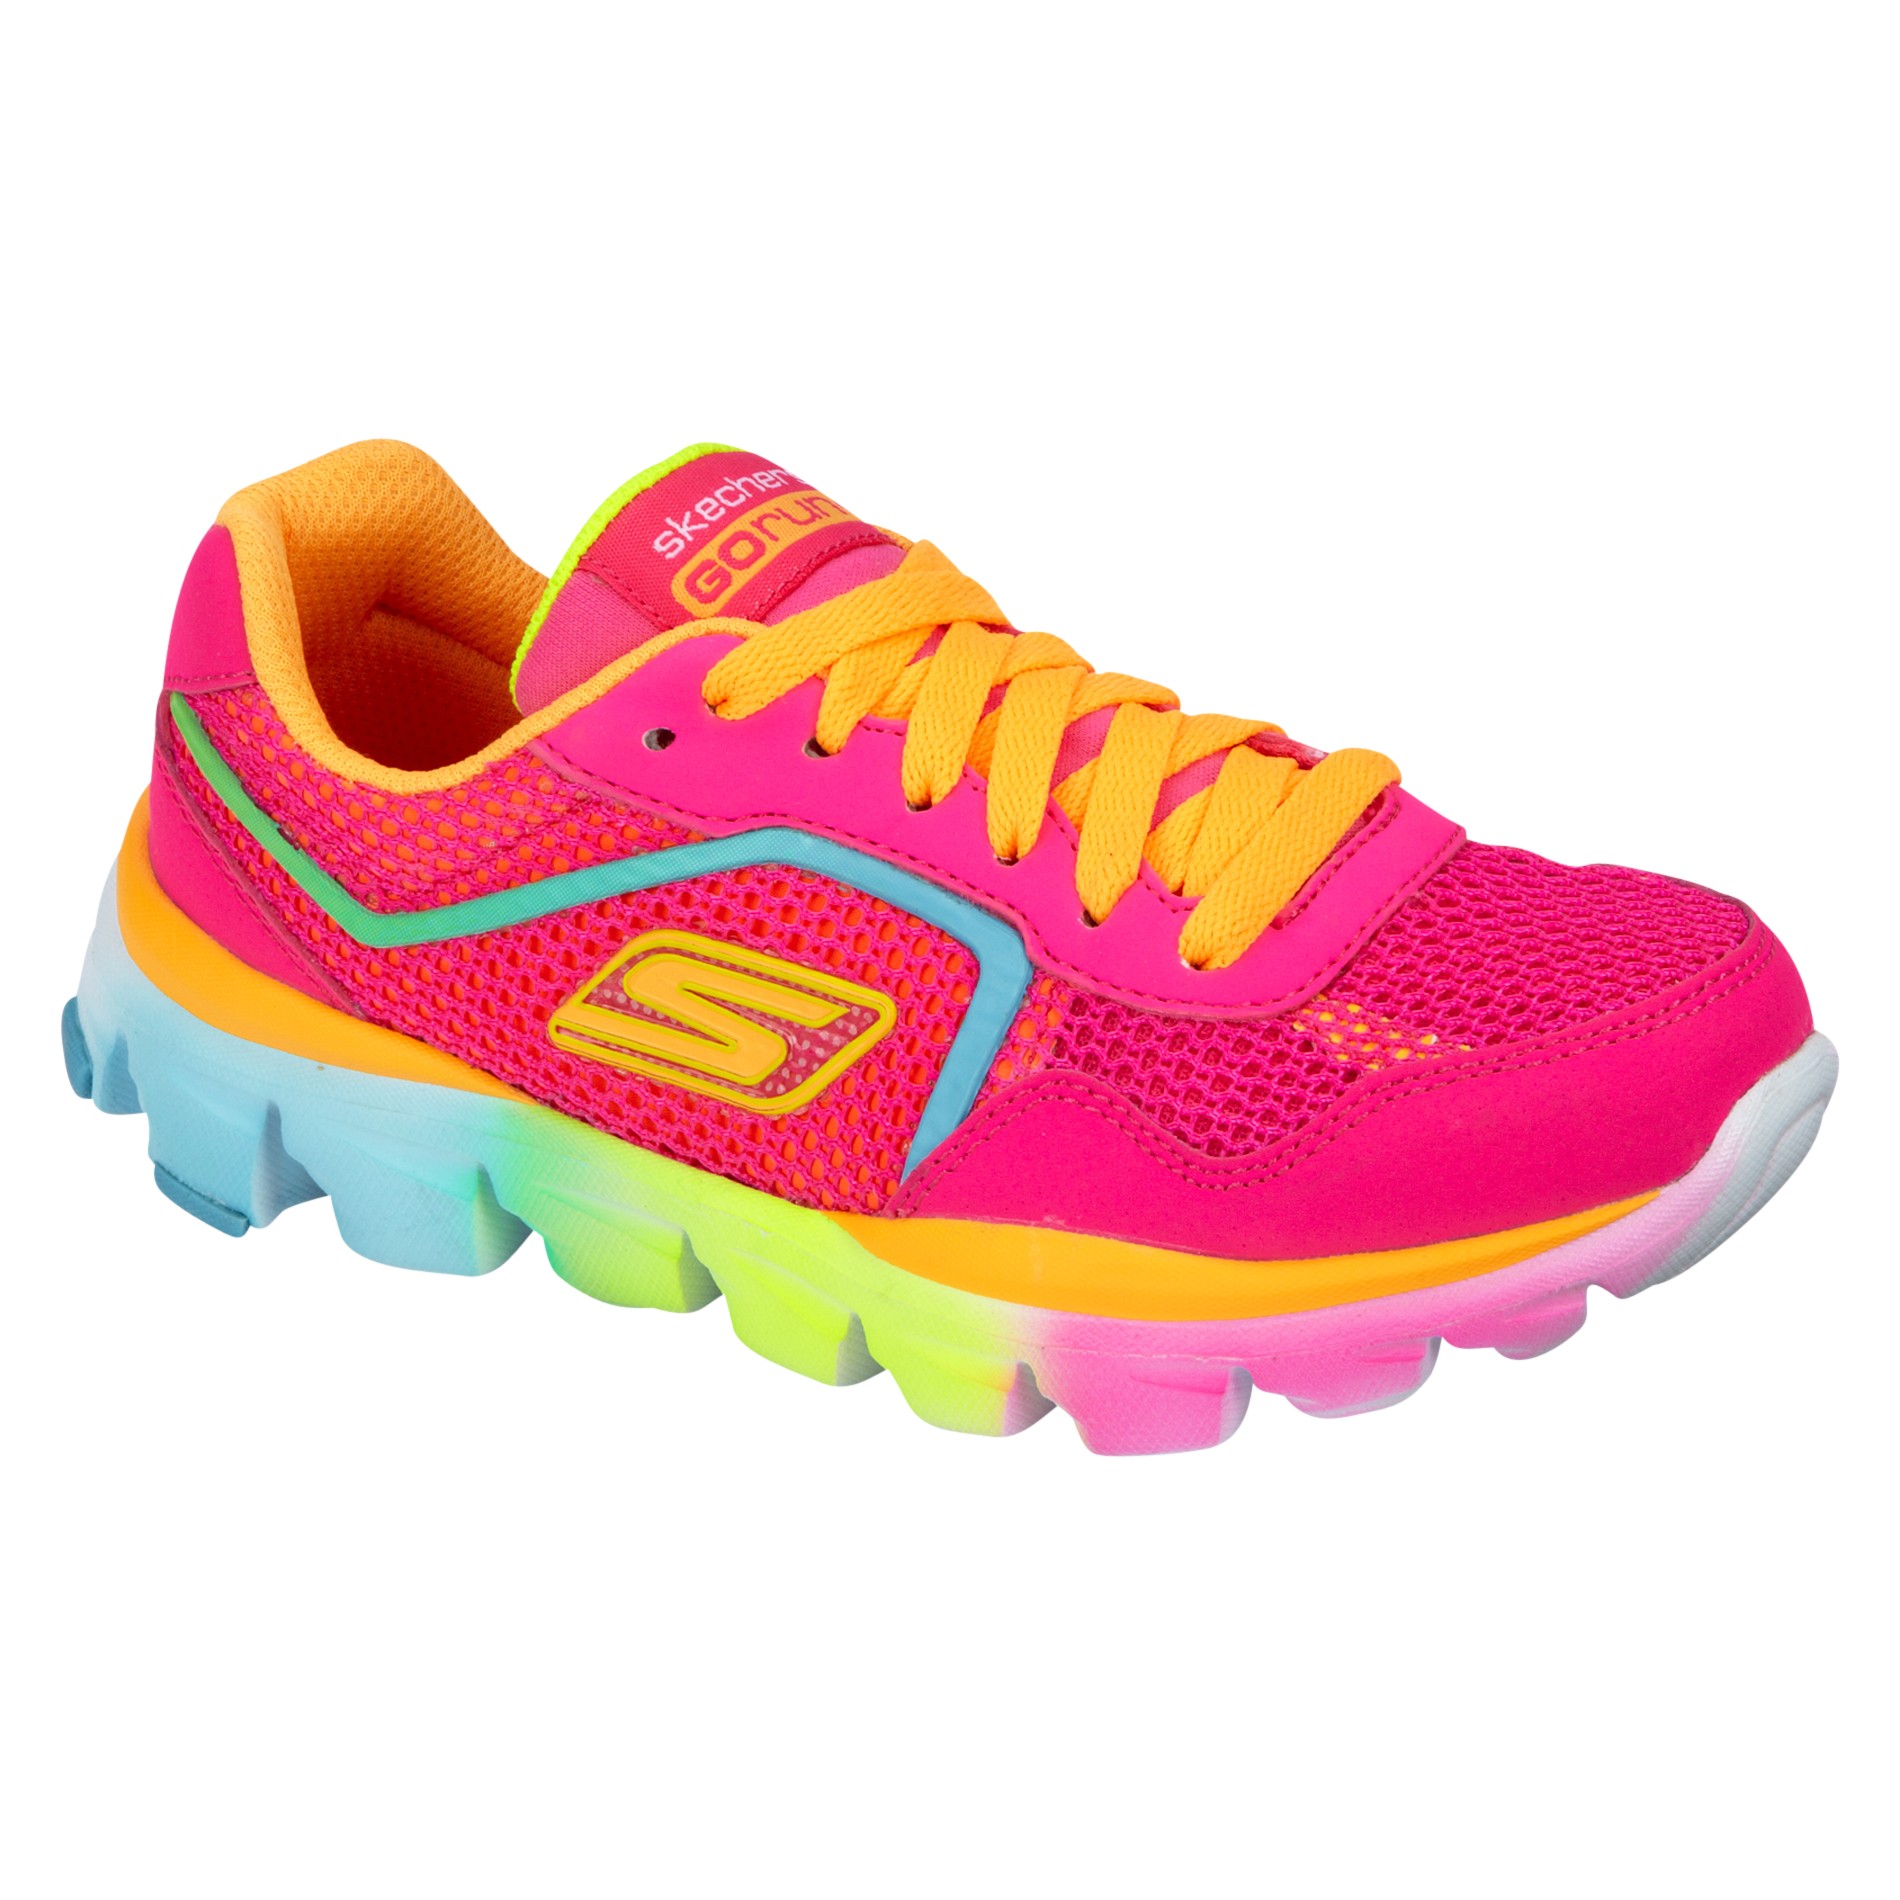 Skechers Girls' Pink Athletic Shoes